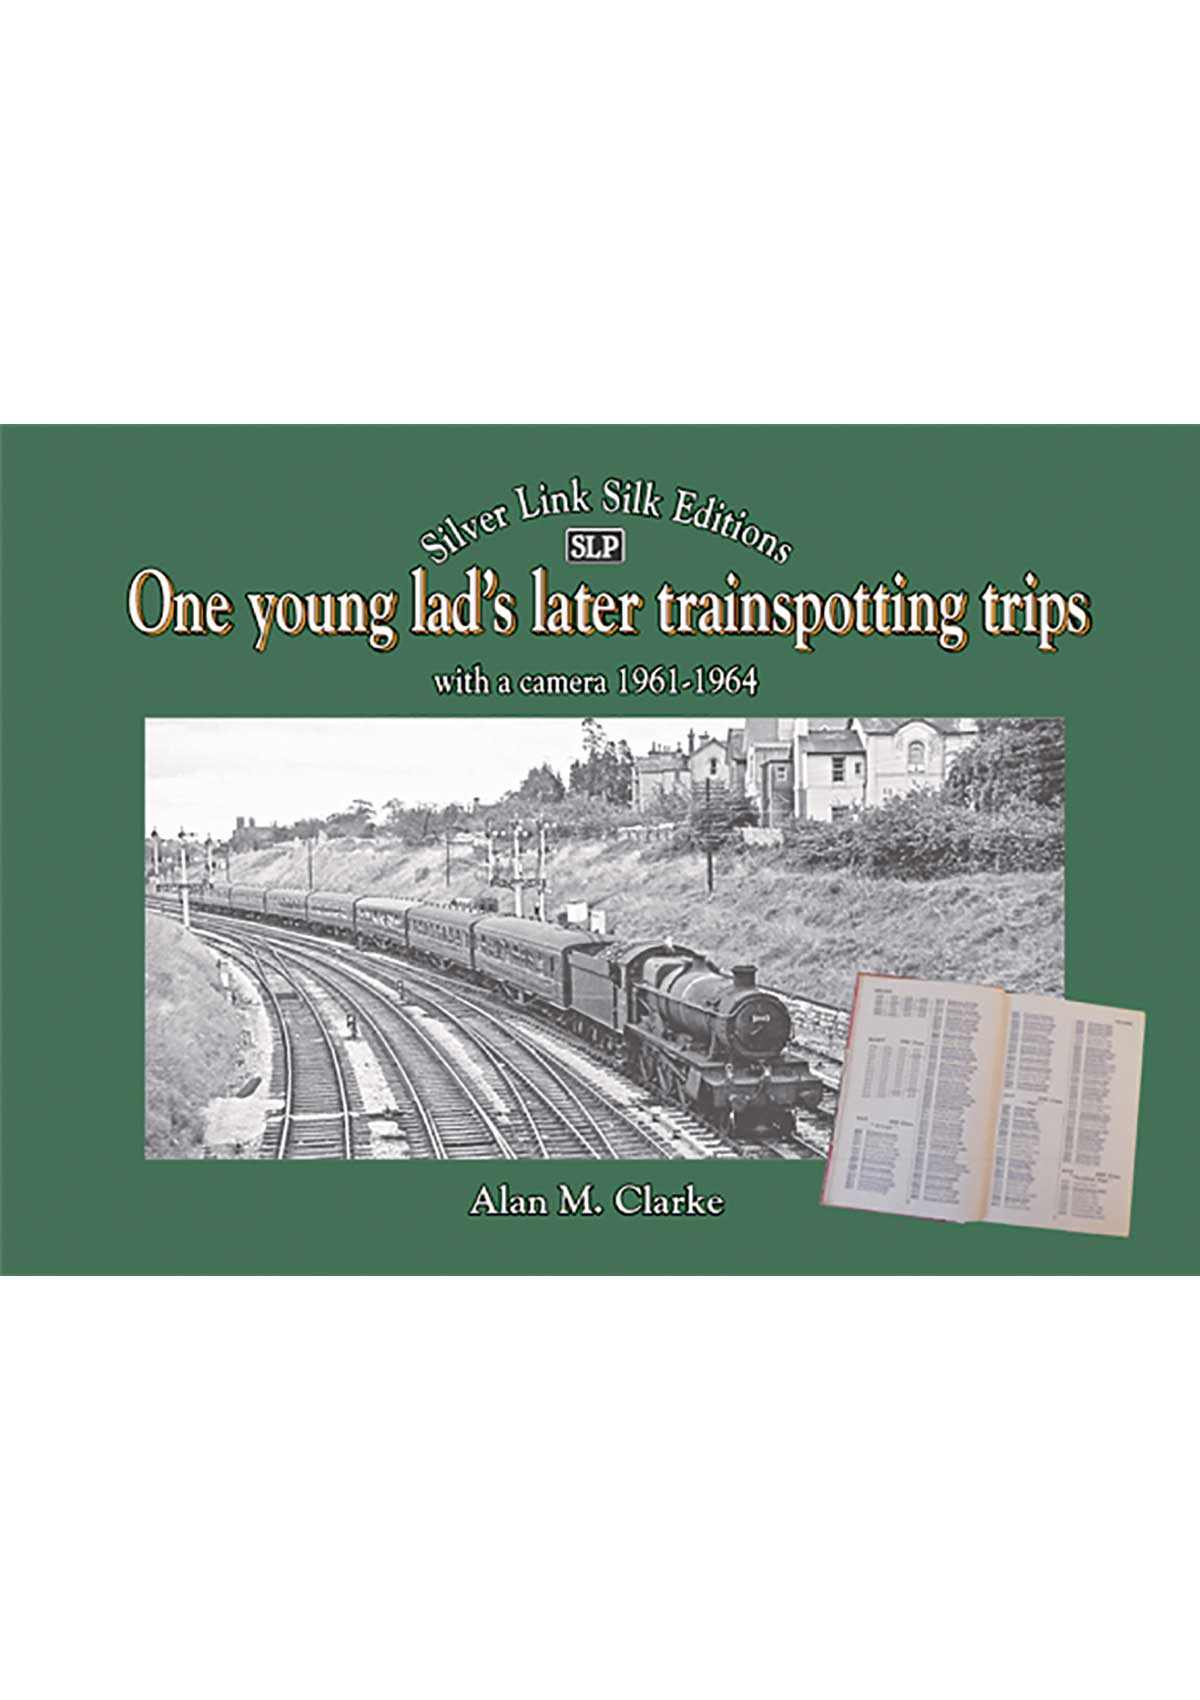 5553 - One Young Lad's Later Trainspotting Trips with a camera 1961-1964